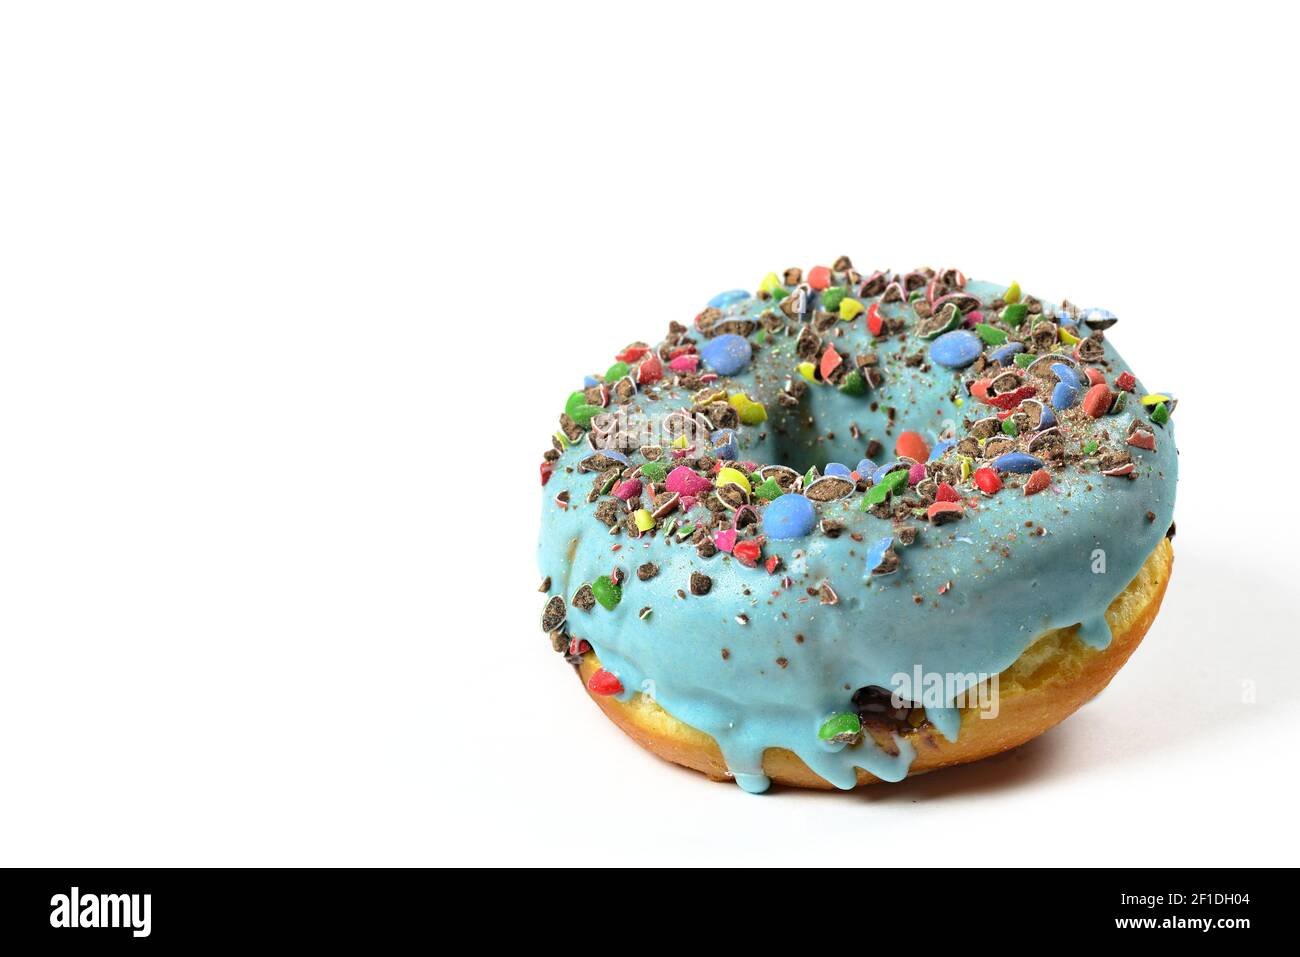 View of sweet donut with blue icing and crushed candies. Close Up of a round confectionery. Donut on a white background. Sweet dish. Ready to eat. Swe Stock Photo